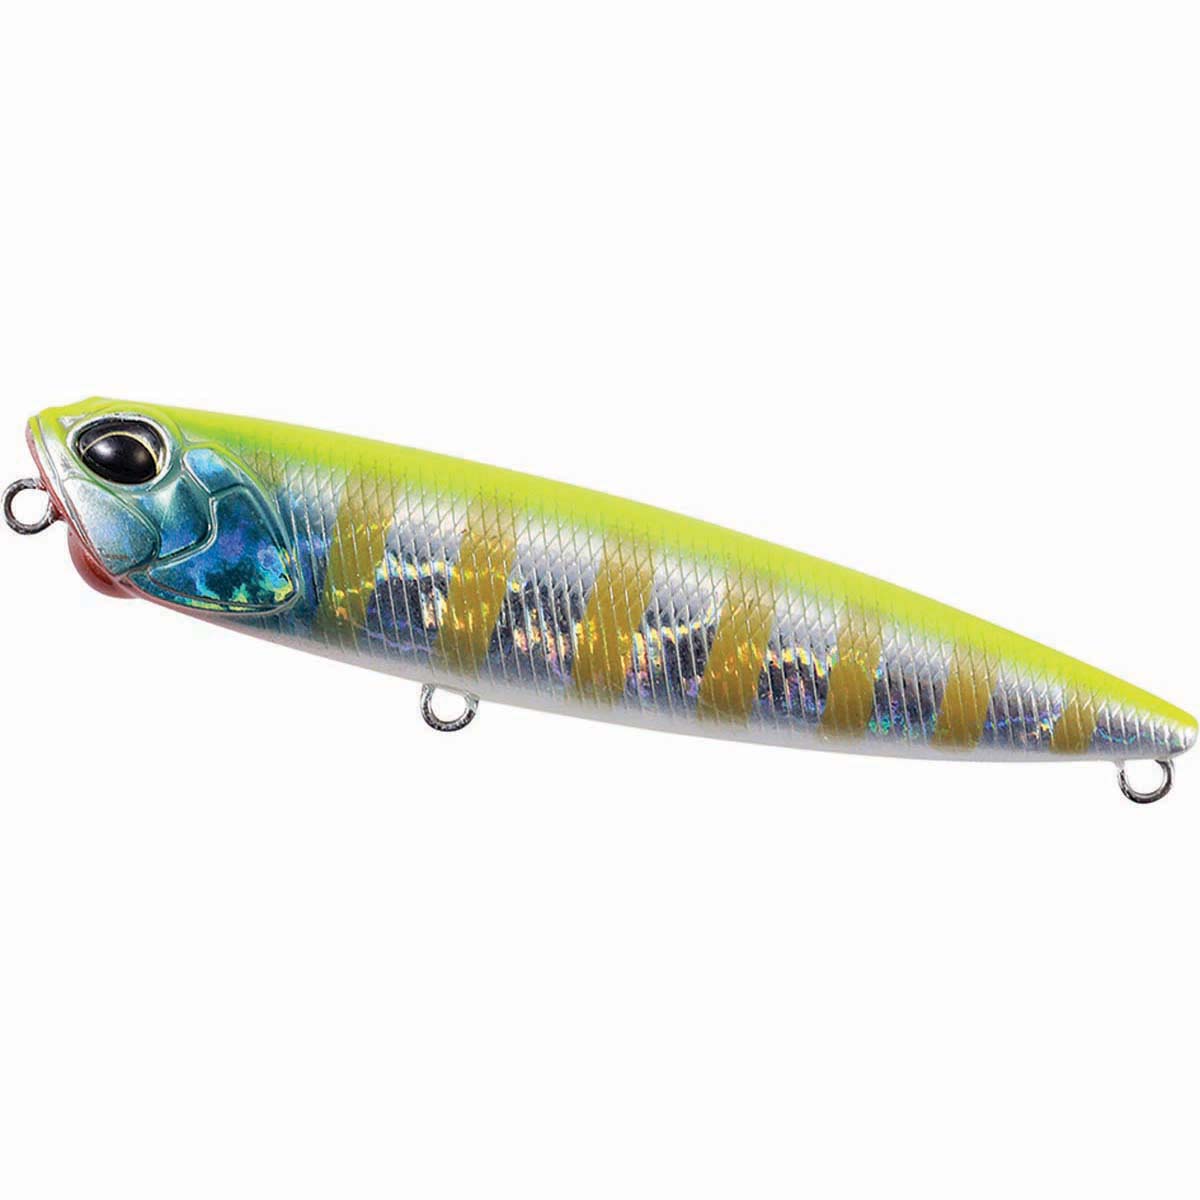 Duo Realis Pencil 8.5cm Lure SW Funky Gill